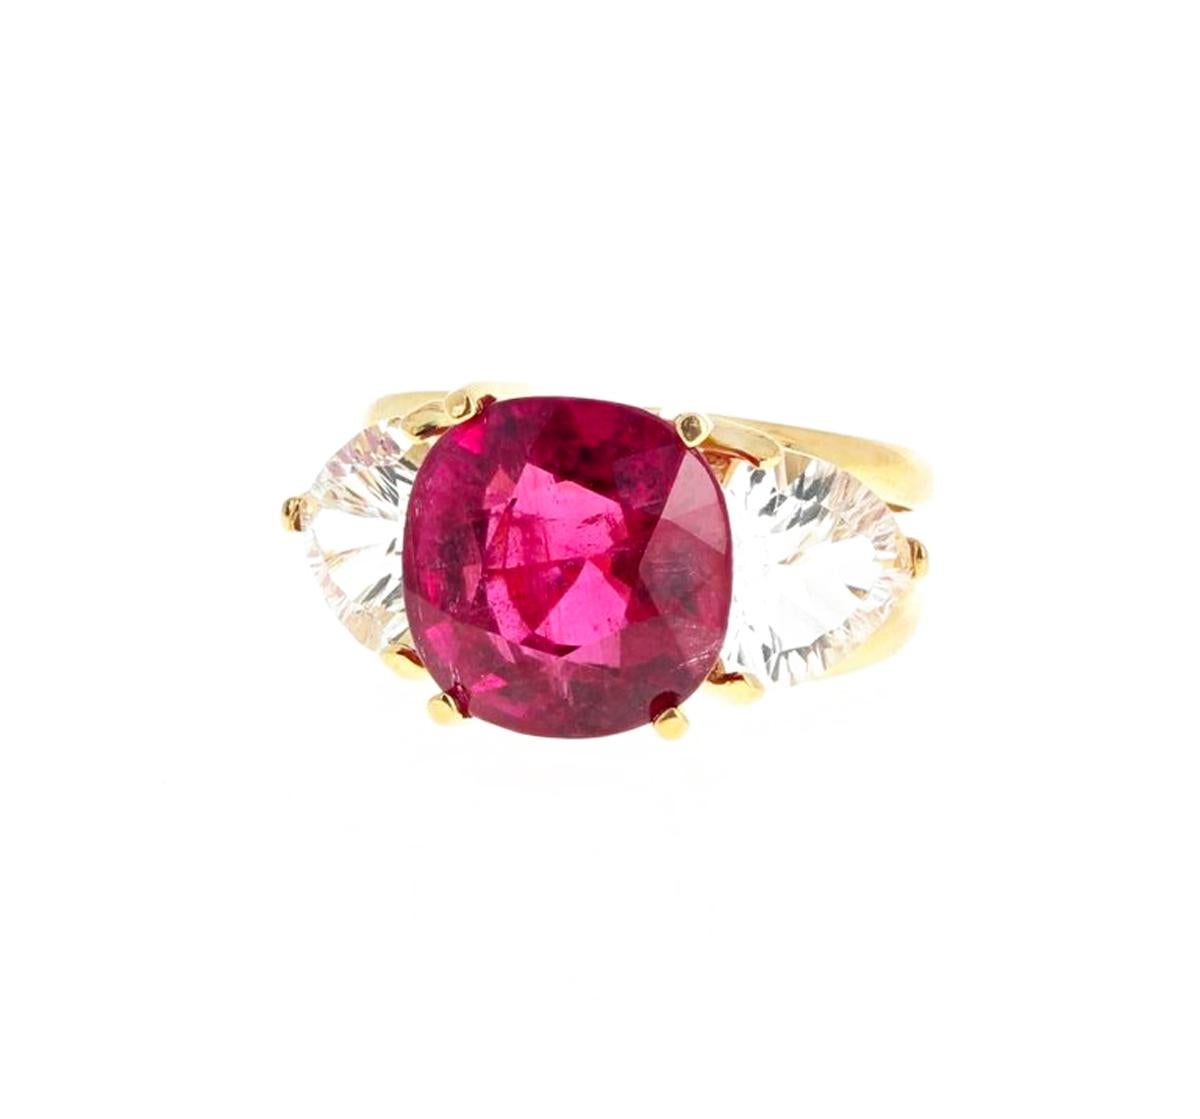 Gemjunky Glamorouse 7.2 Ct Tourmaline and Silver Topaz 18 Kt Yellow Gold Ring 2